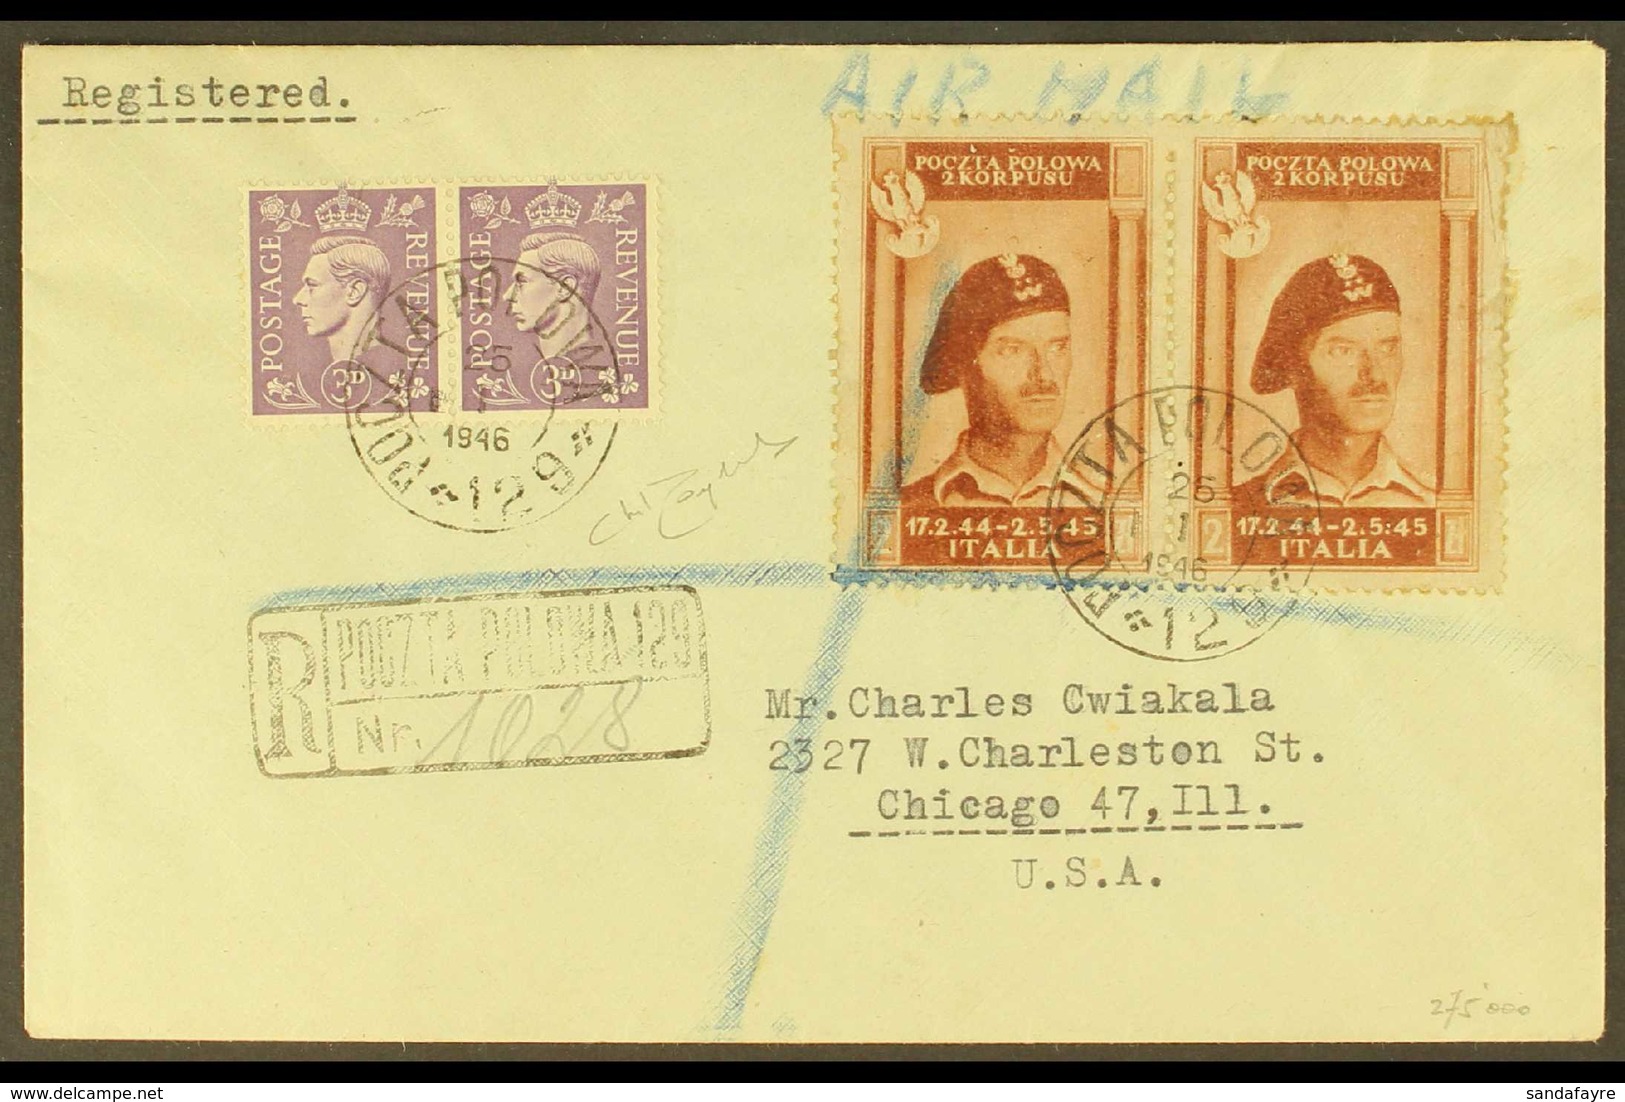 POLISH CORPS 1946 Registered Cover To Chicago Franked GB 3d Lilac Plus Polish Corps 2z Red Brown Pair, Sass 4, With Pozt - Non Classés